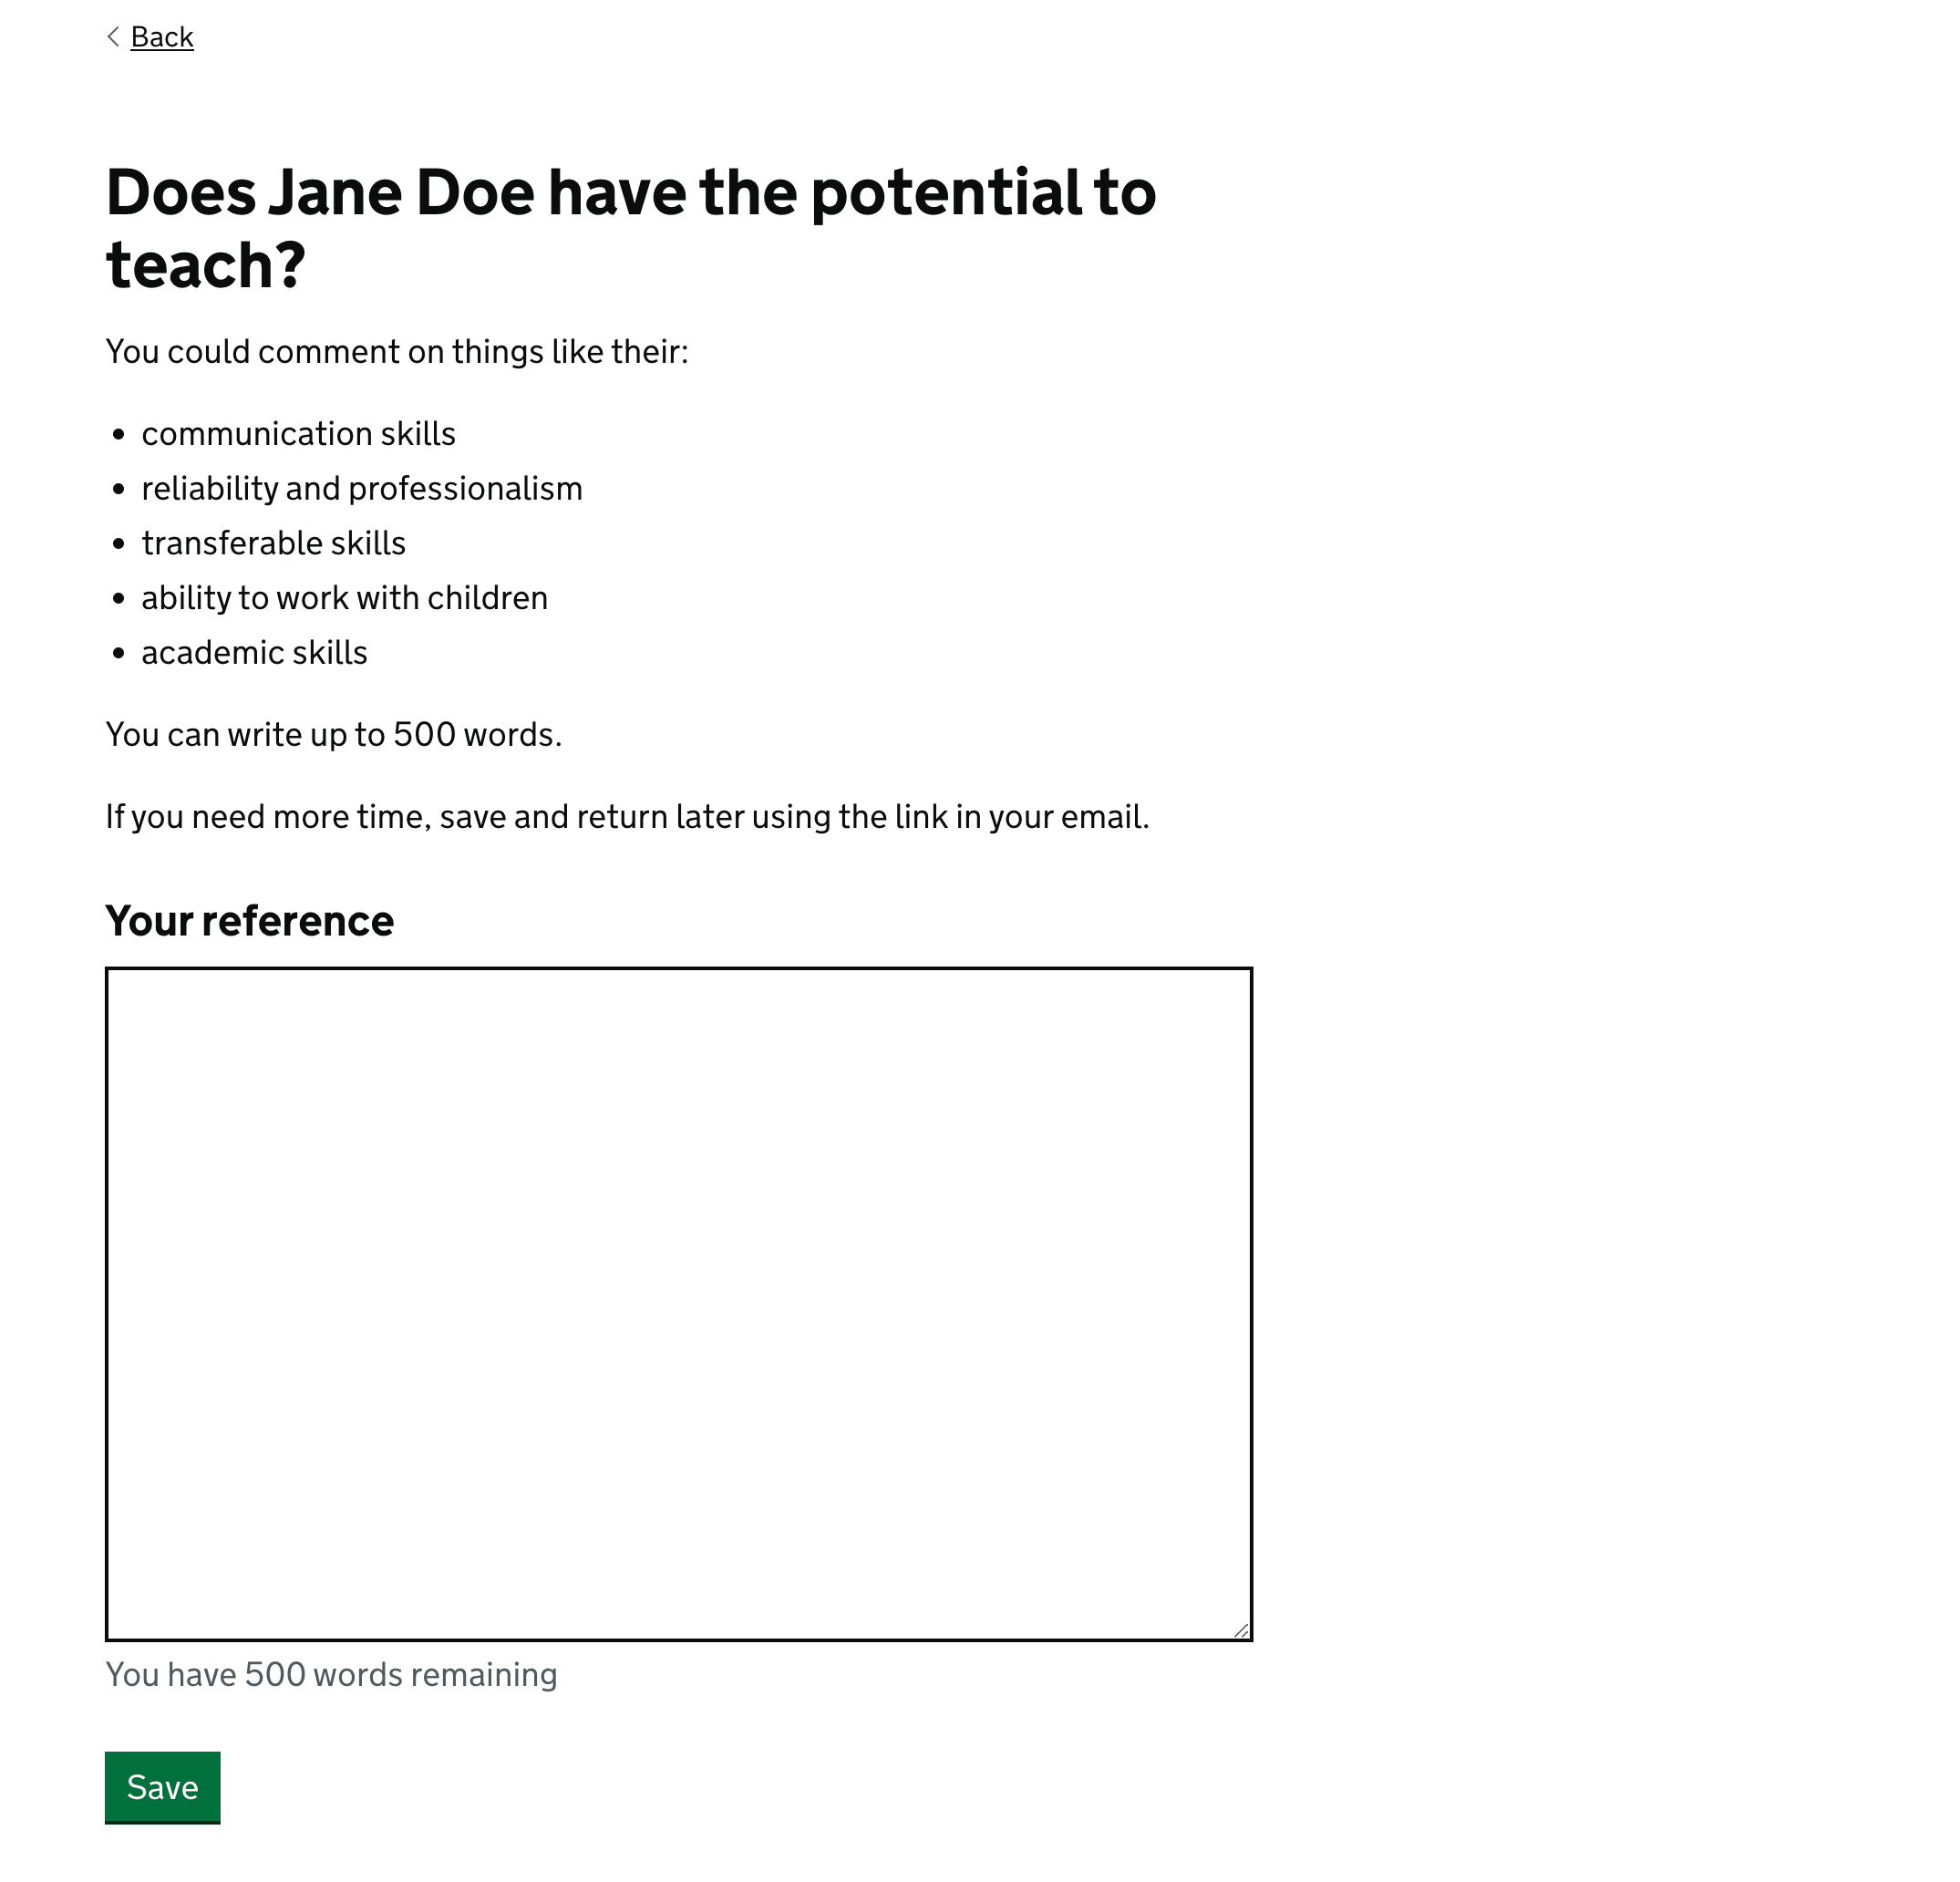 Screenshot showing the heading 'Does Jane Doe have the potential to teach?' followed by 'You could comment on things like their commuication skills, reliability and punctuality, transferable skills, ablity to work with children or academic schools'.